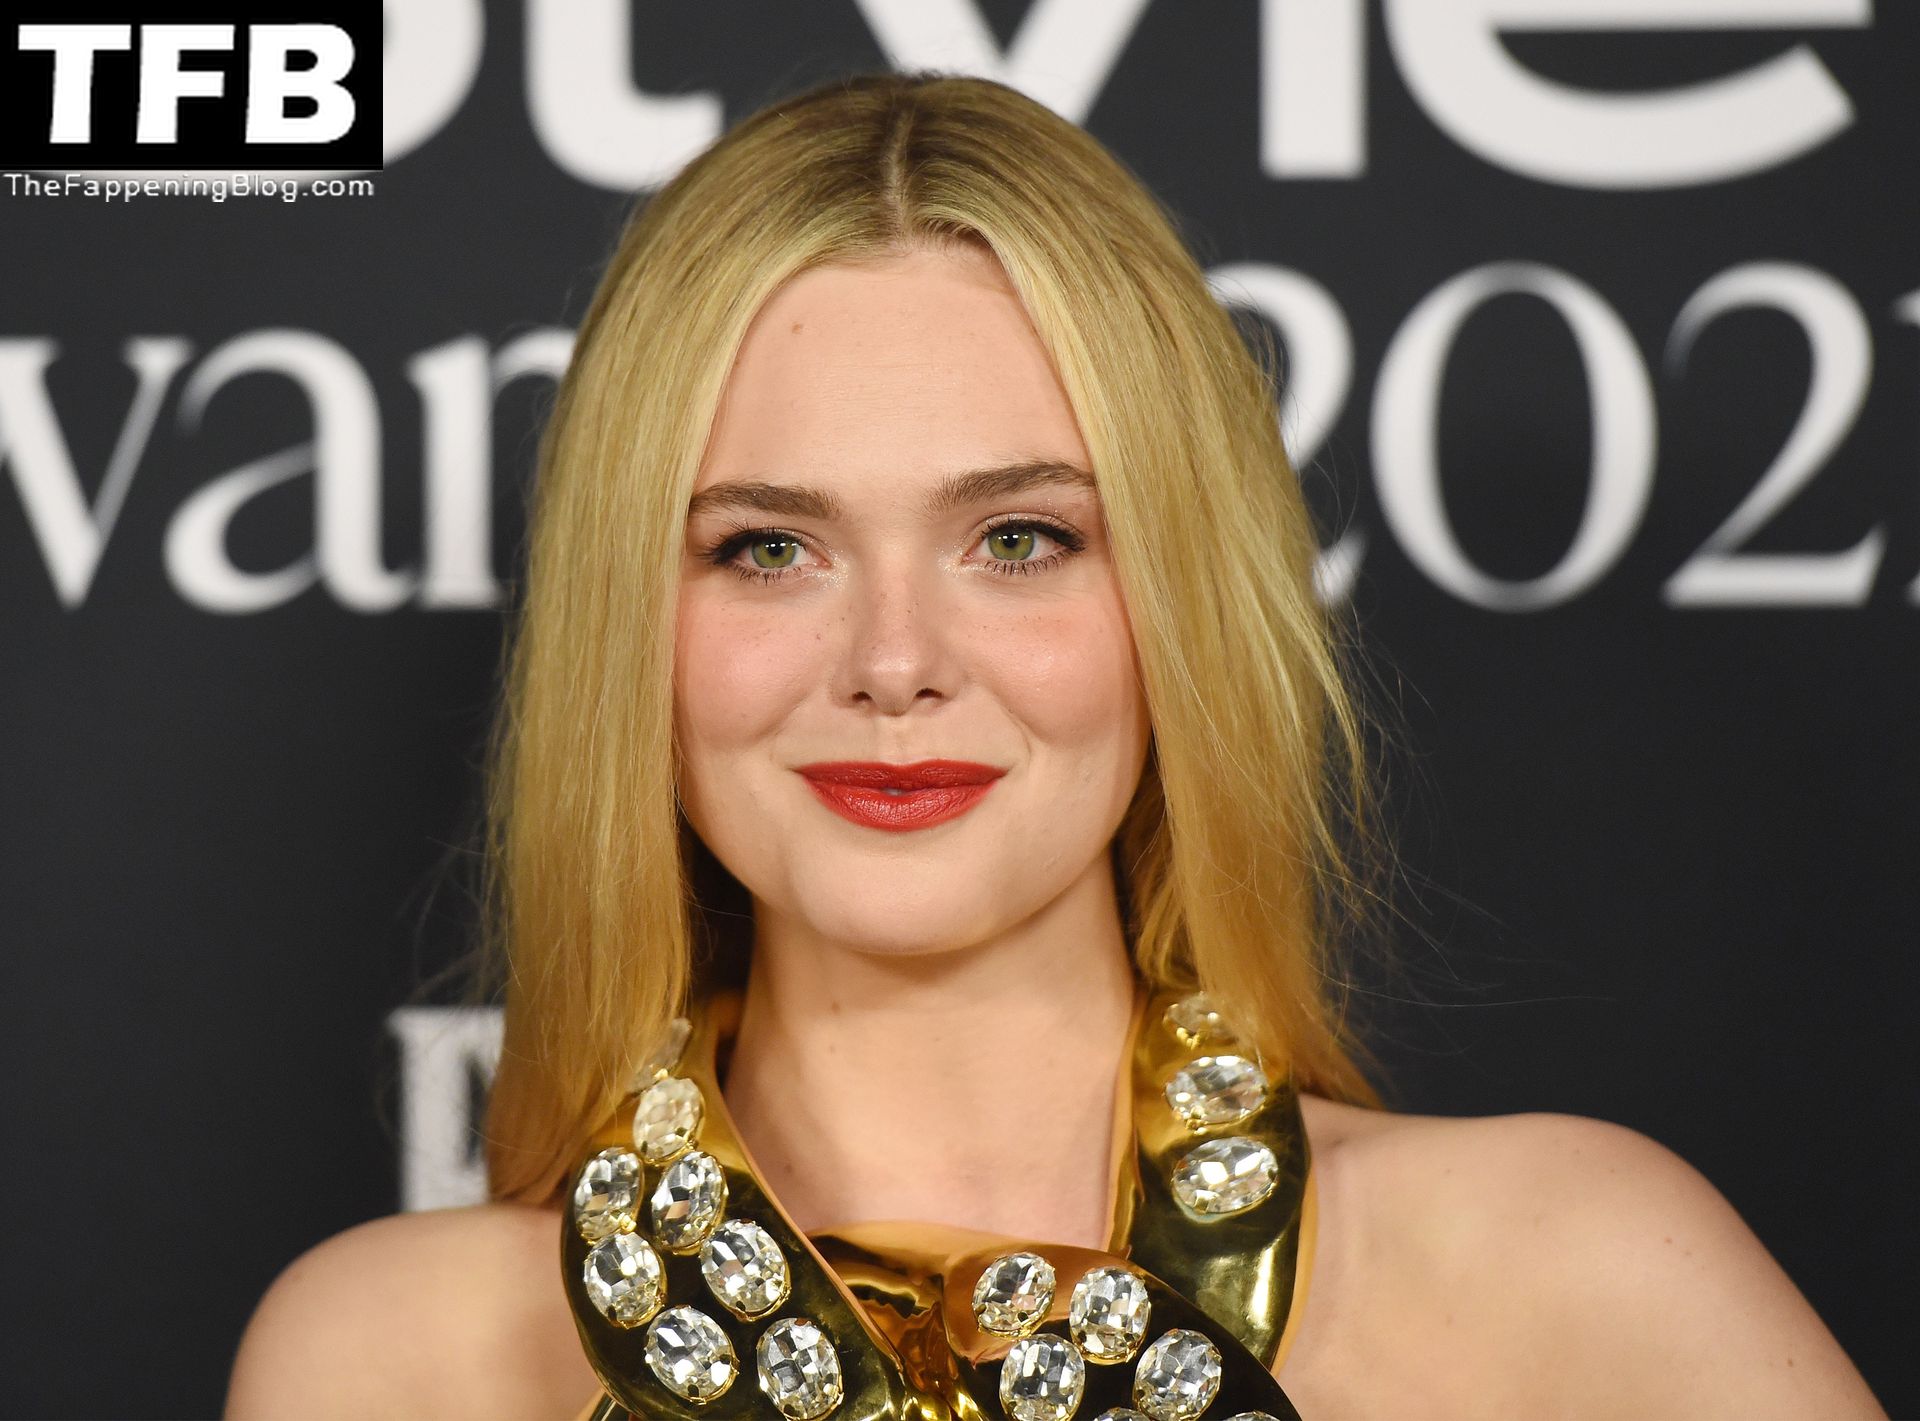 Elle-Fanning-Sexy-Braless-The-Fappening-Blog-75.jpg